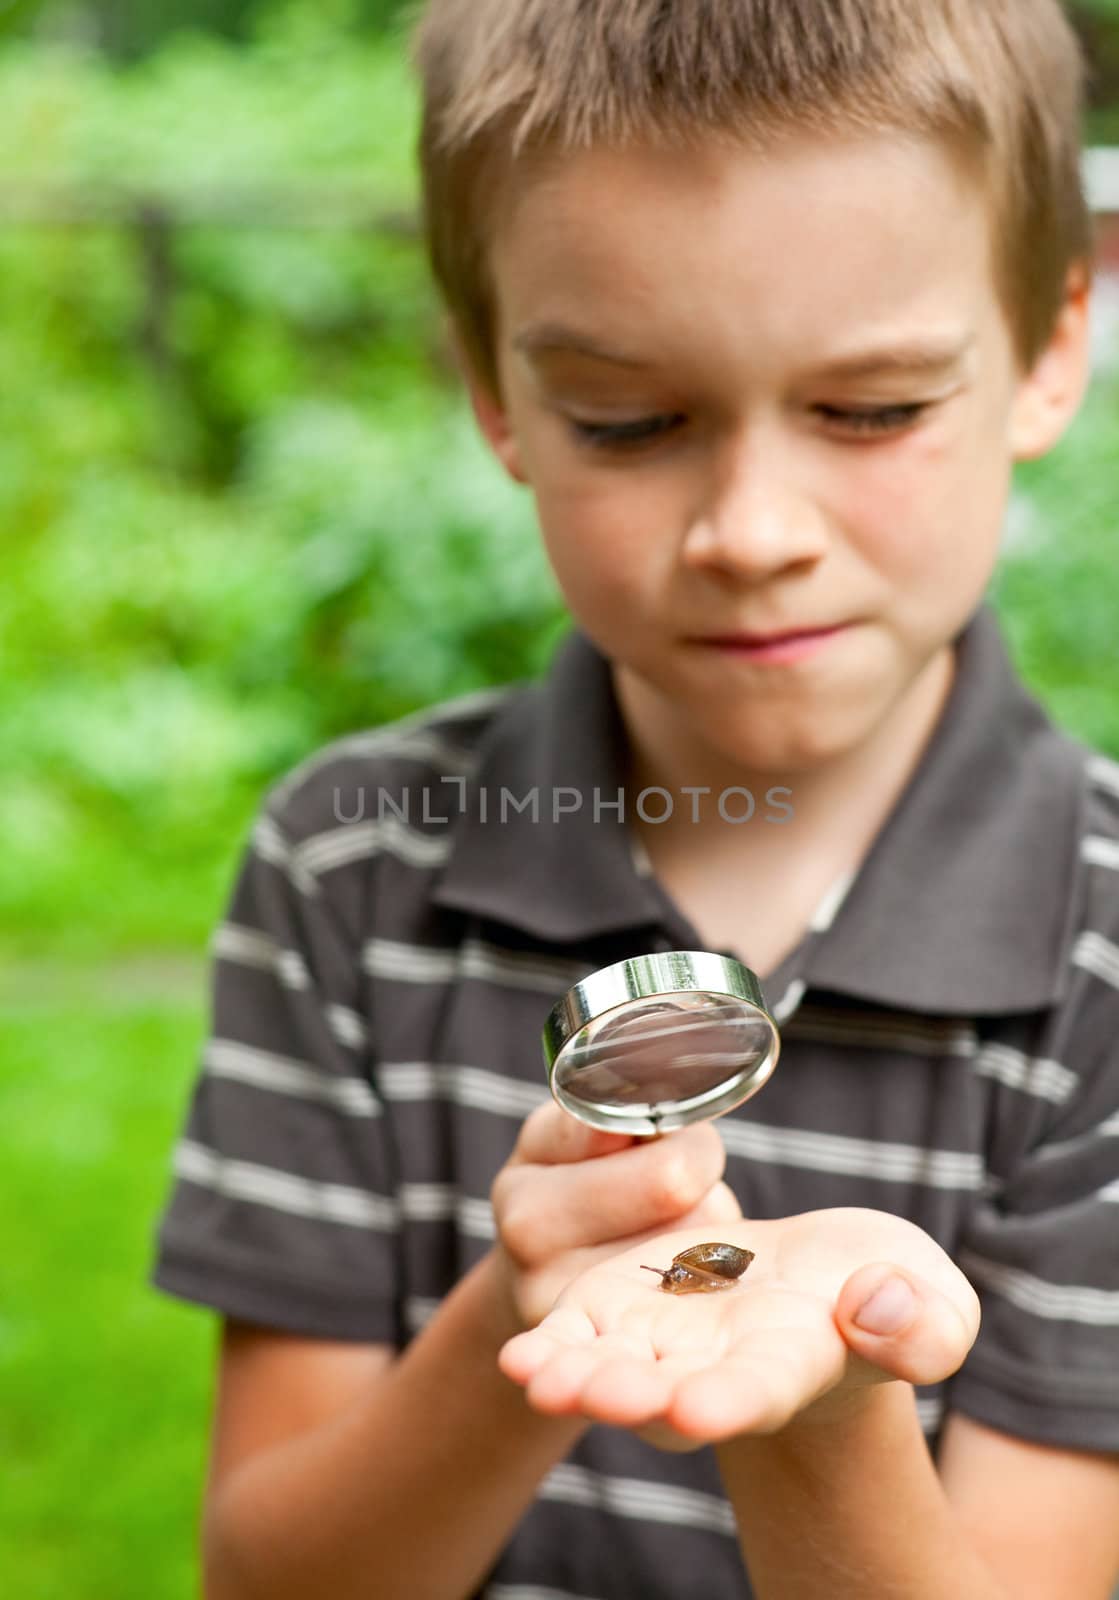 Young boy looking at snail through hand magnifier, focus on snail